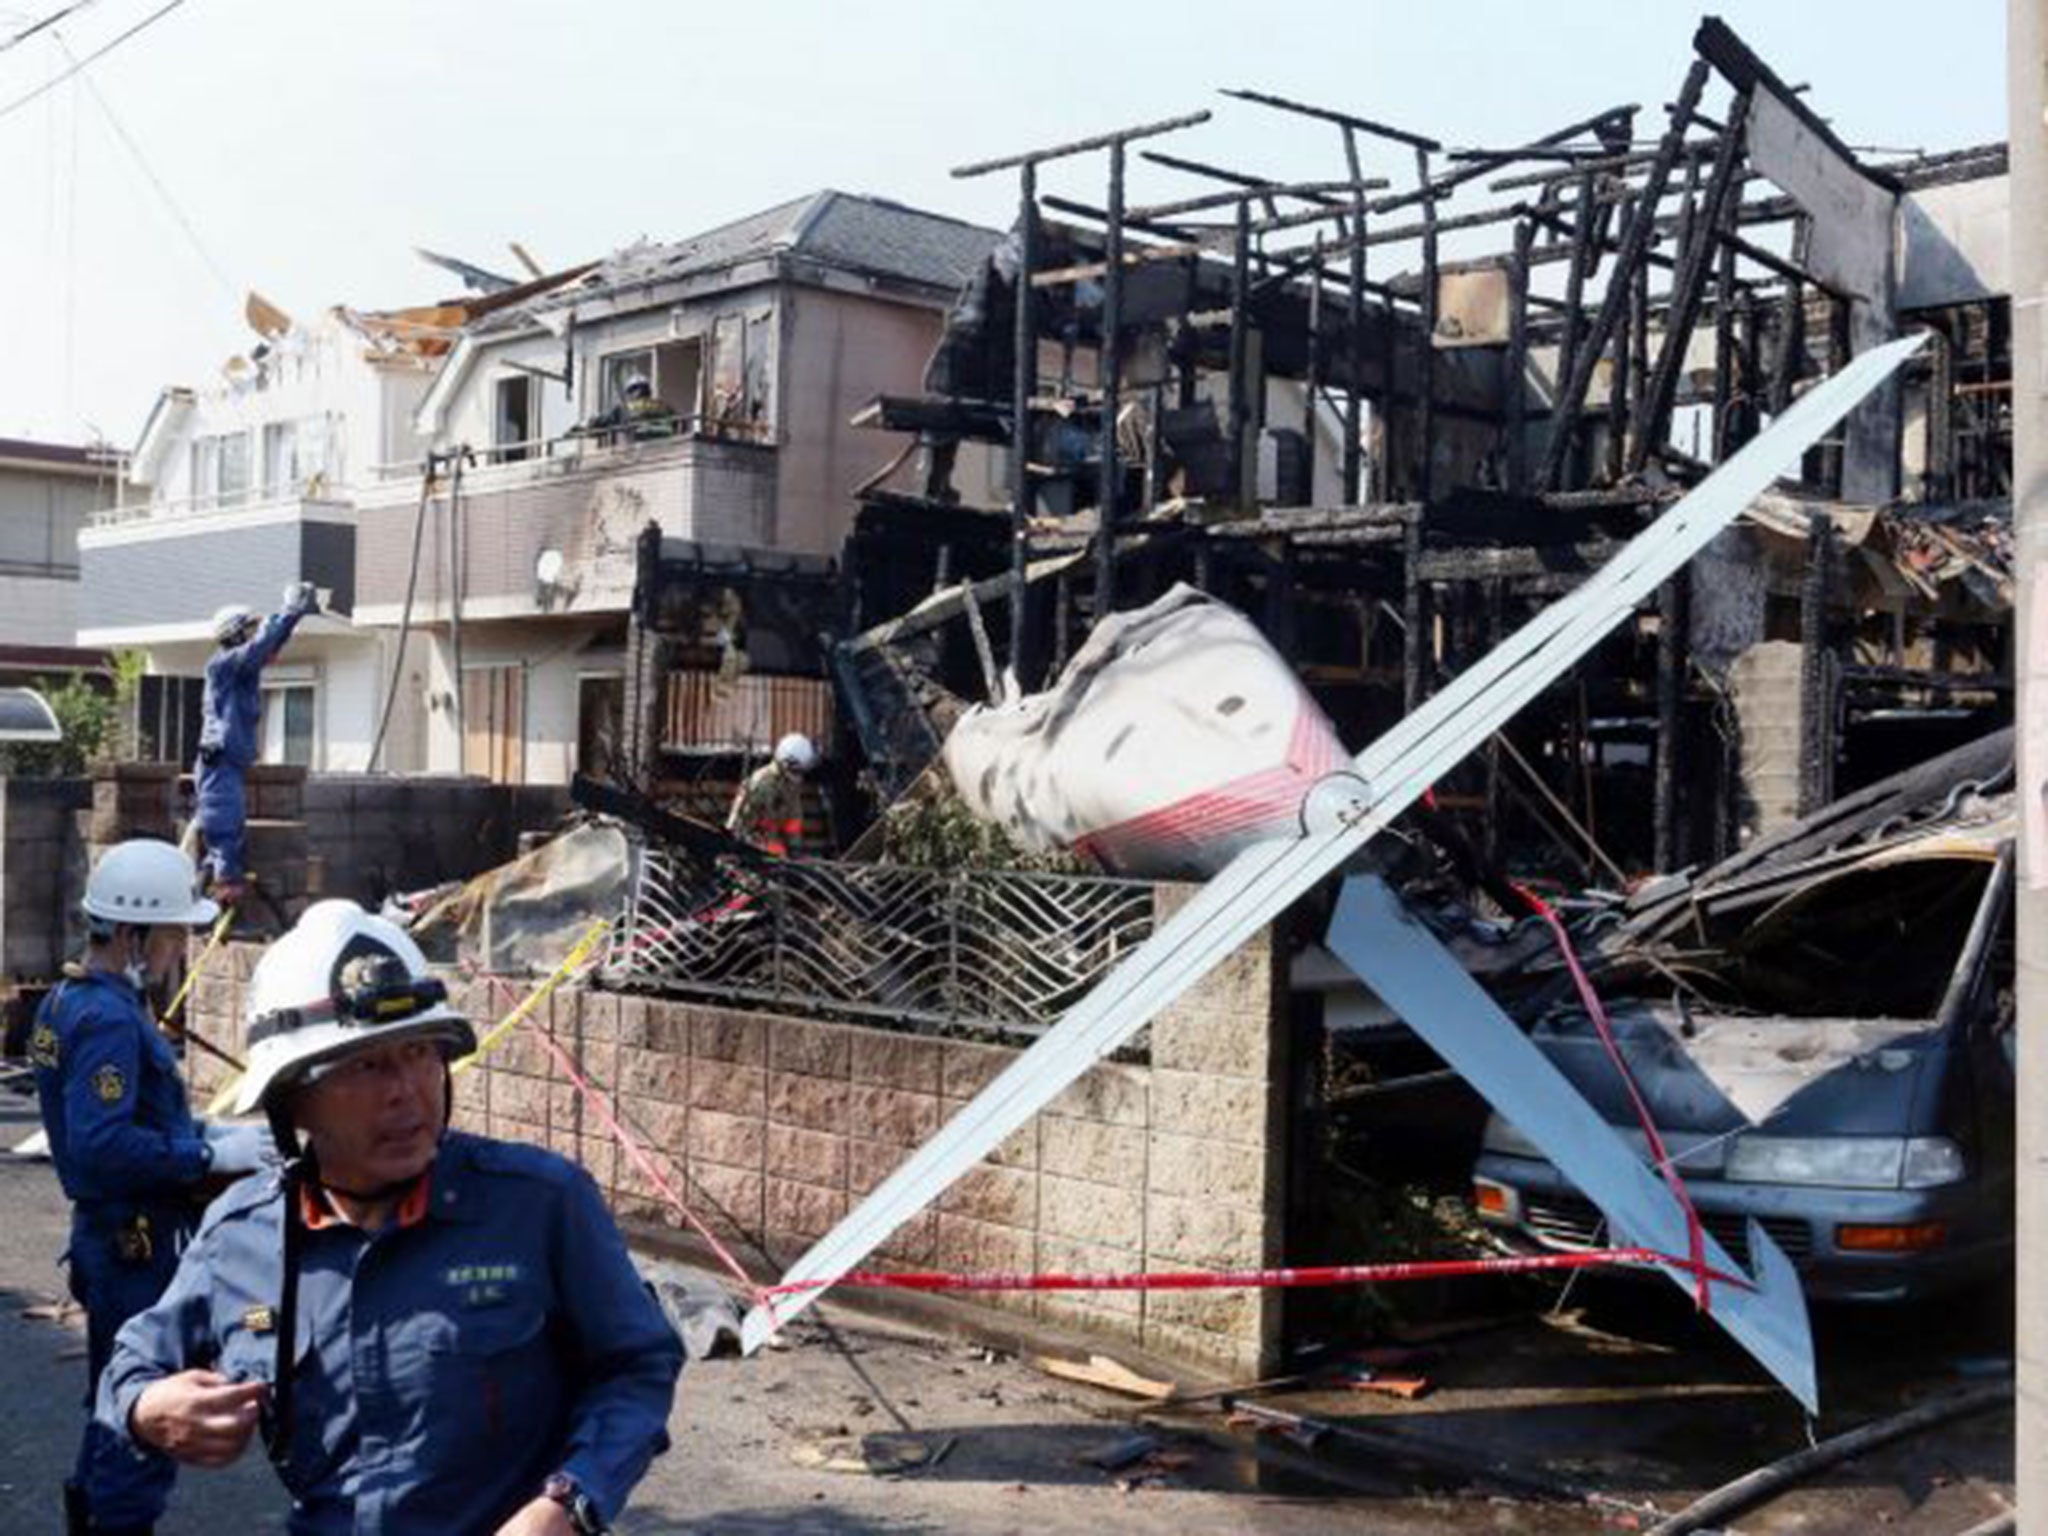 The light aircraft's tail protrudes from the burnt out shell of the house (AFP)